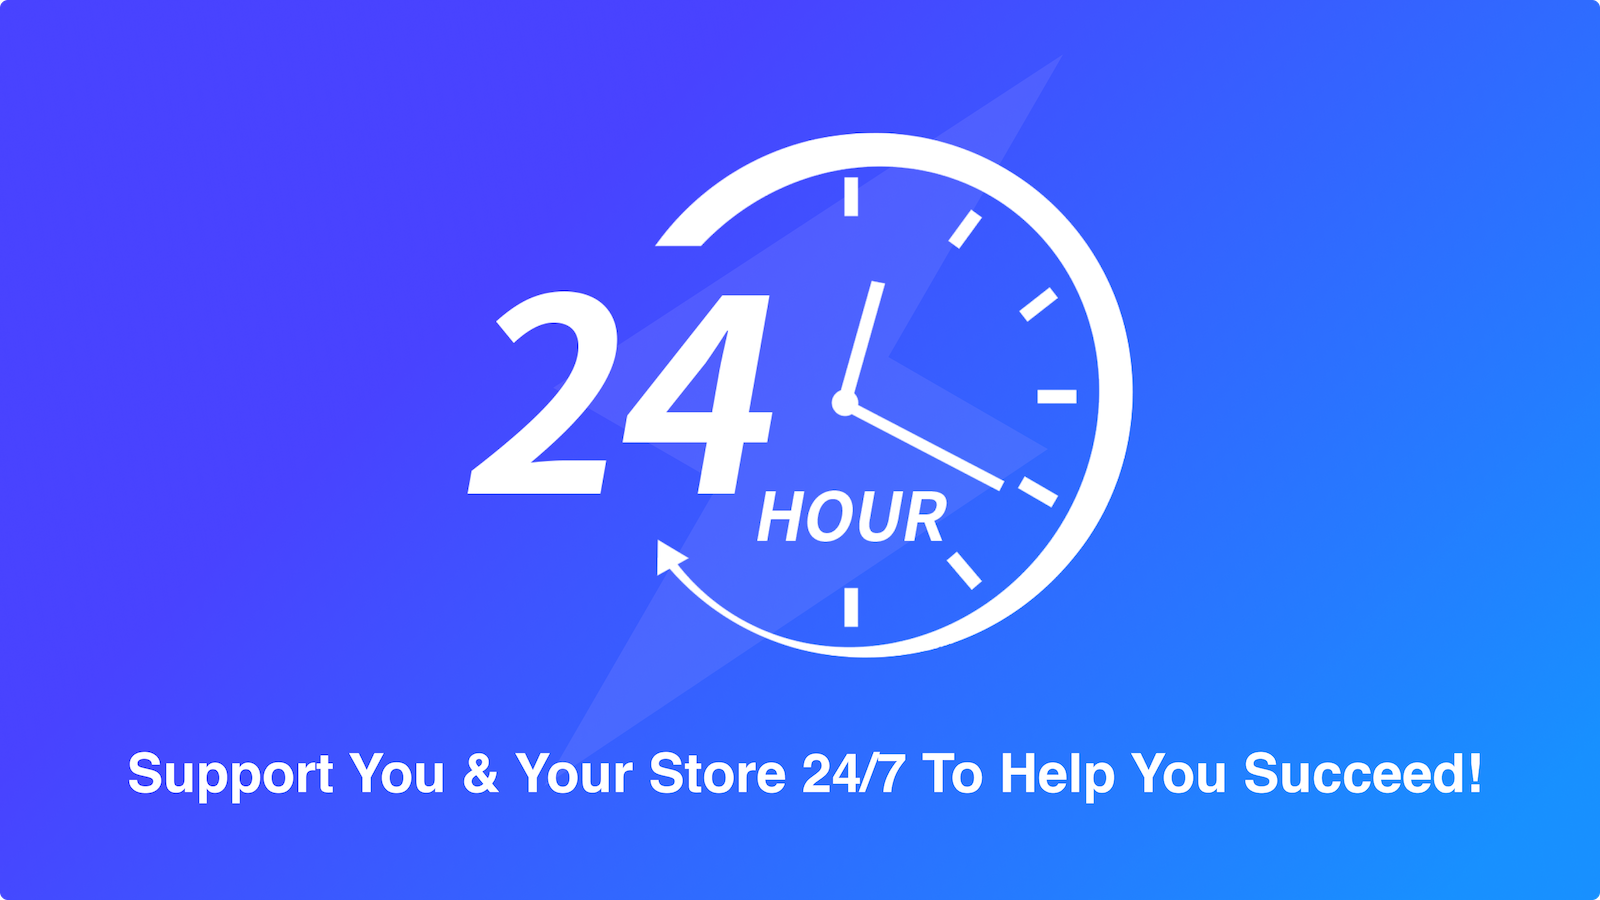 Support You & Your Store 24/7 to Help You Succeed!